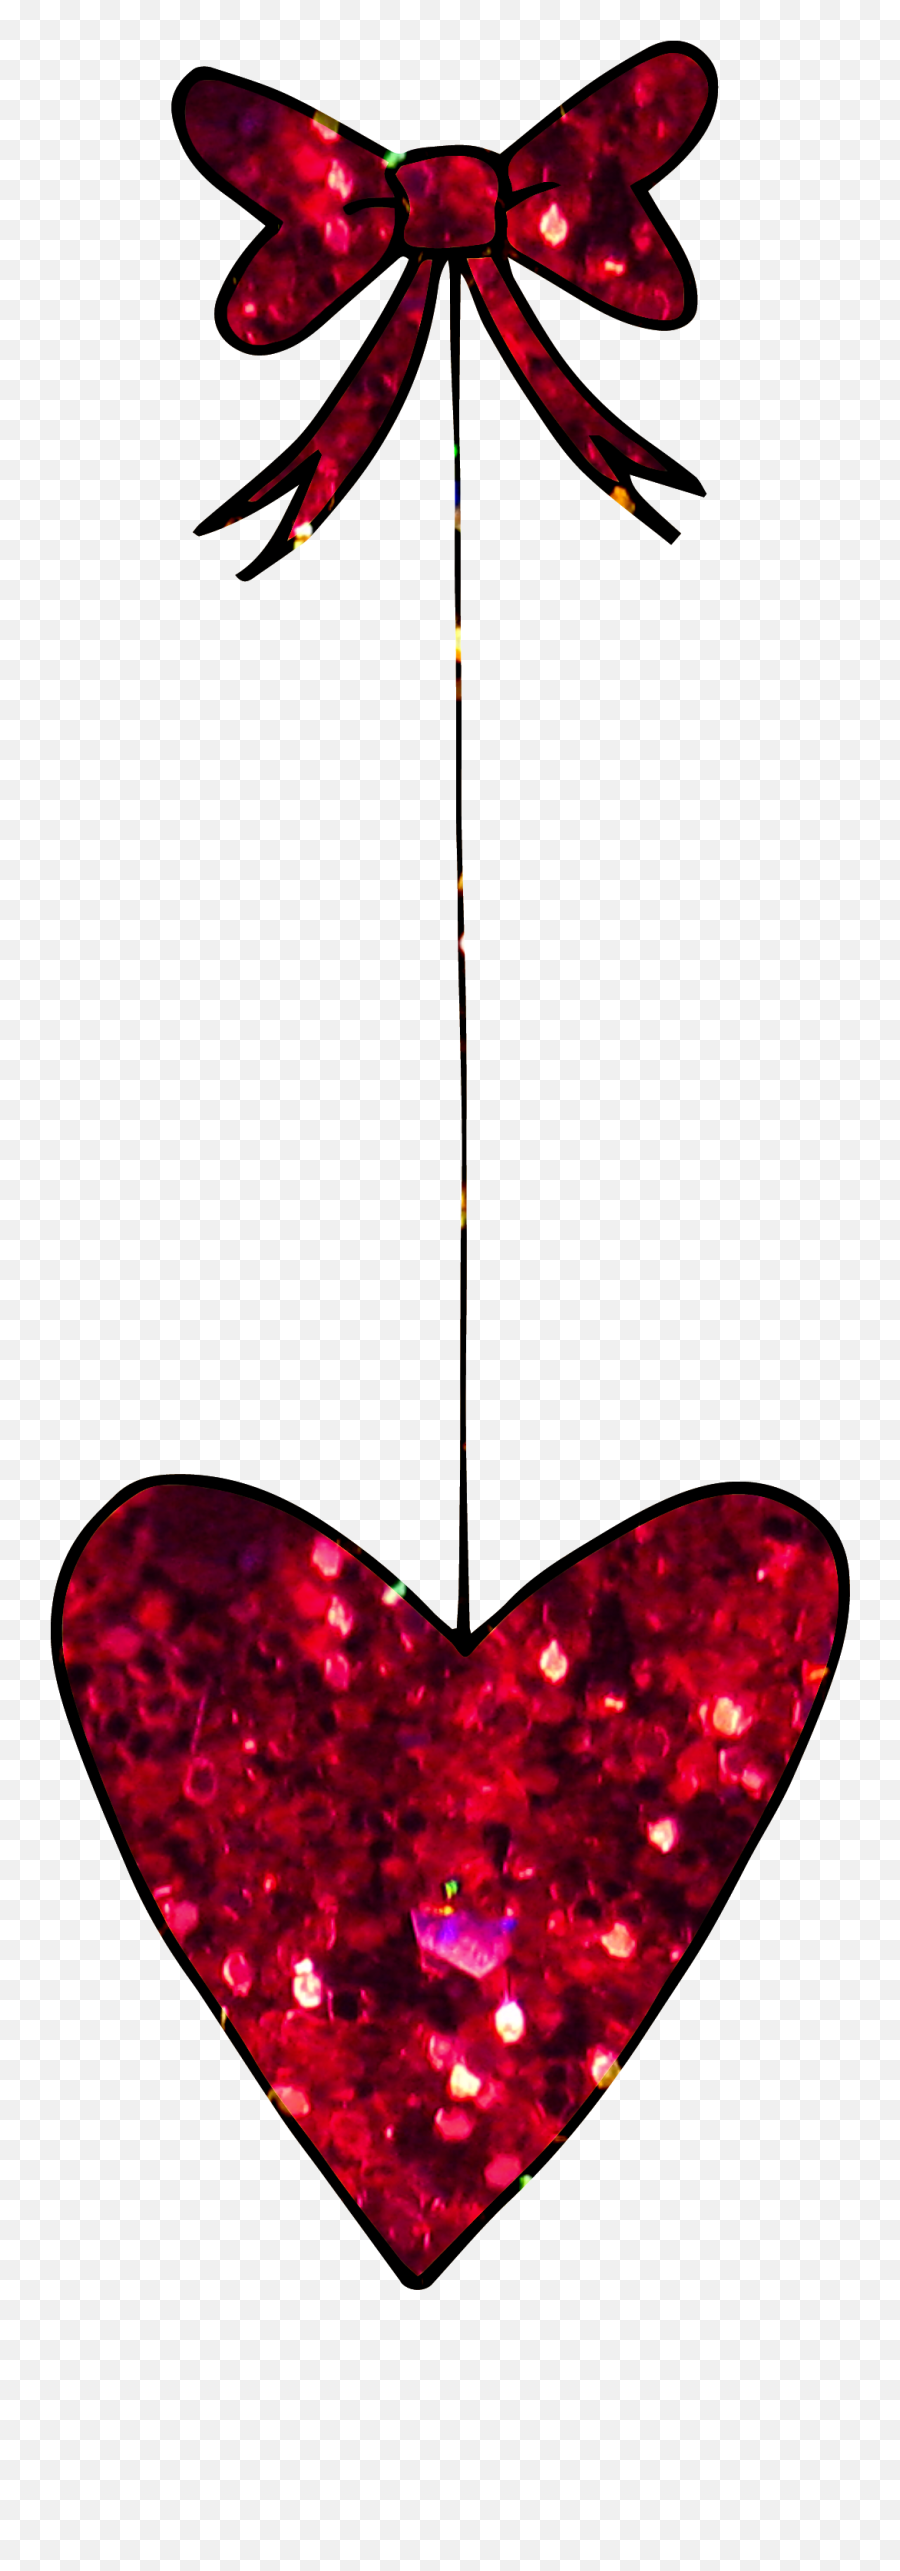 Download Hd Red Glitter Hanging Heart - Heart Transparent Heart Png,Red Glitter Png